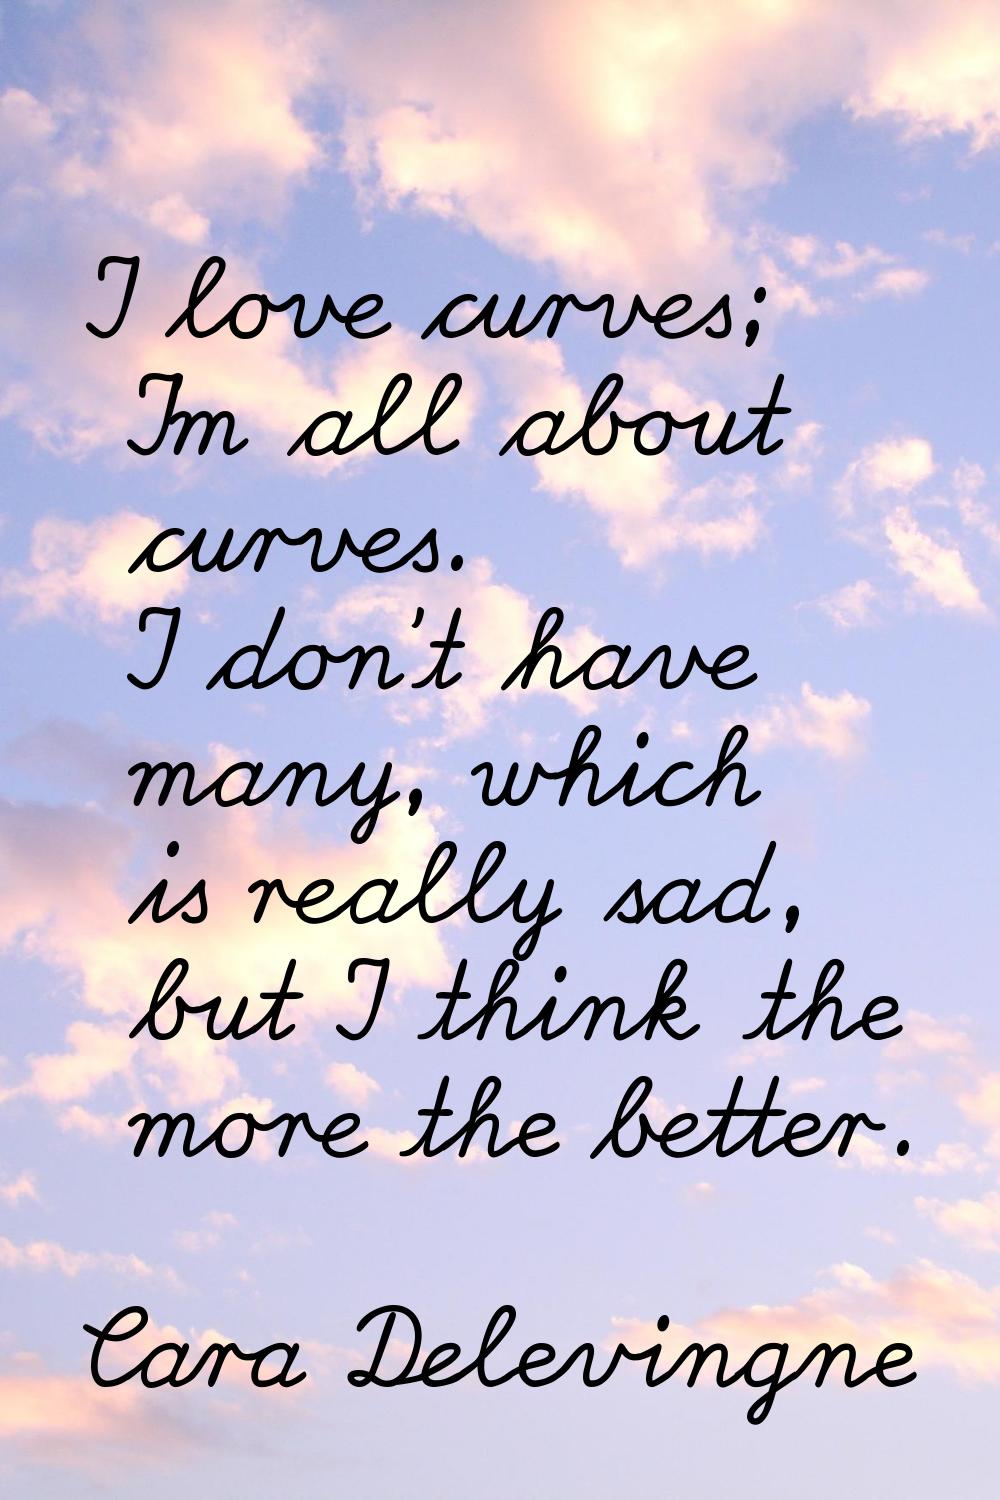 I love curves; I'm all about curves. I don't have many, which is really sad, but I think the more t